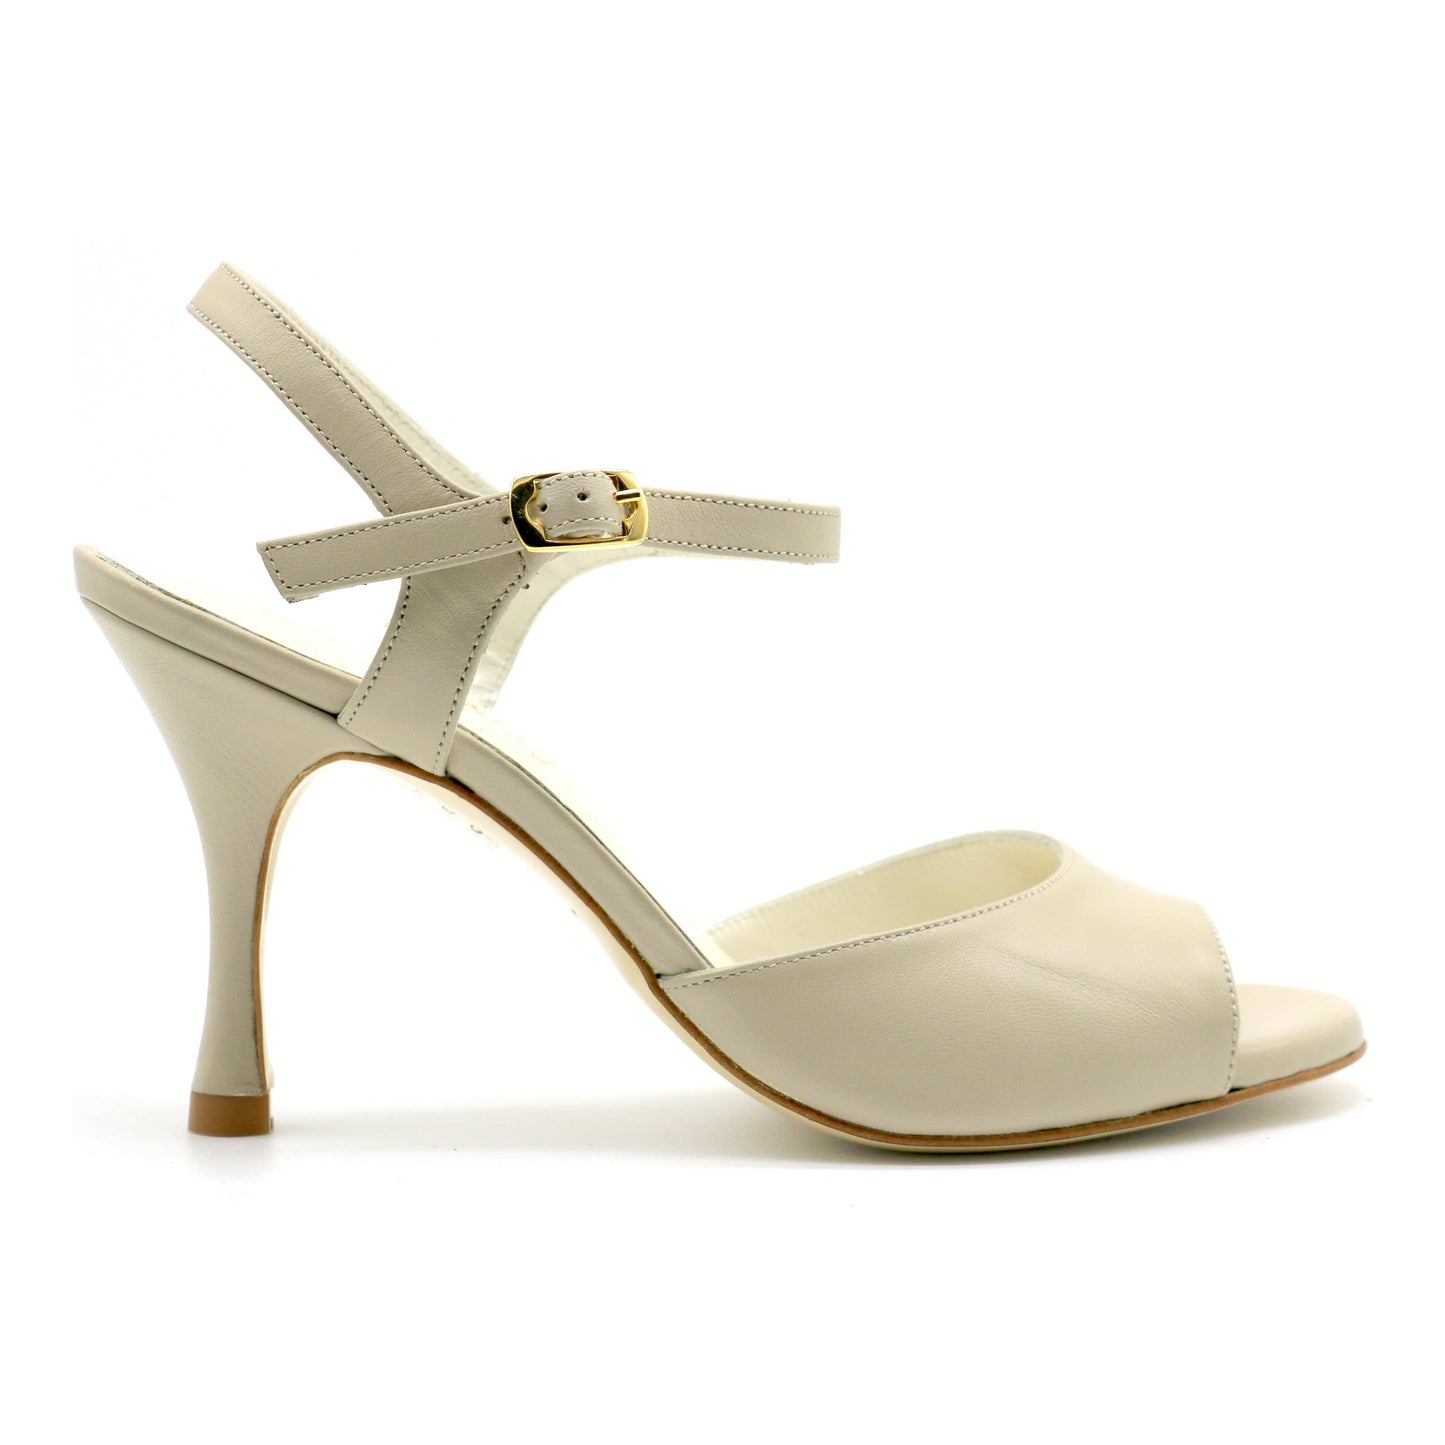 Uno Smooth nude leather 8cm heels